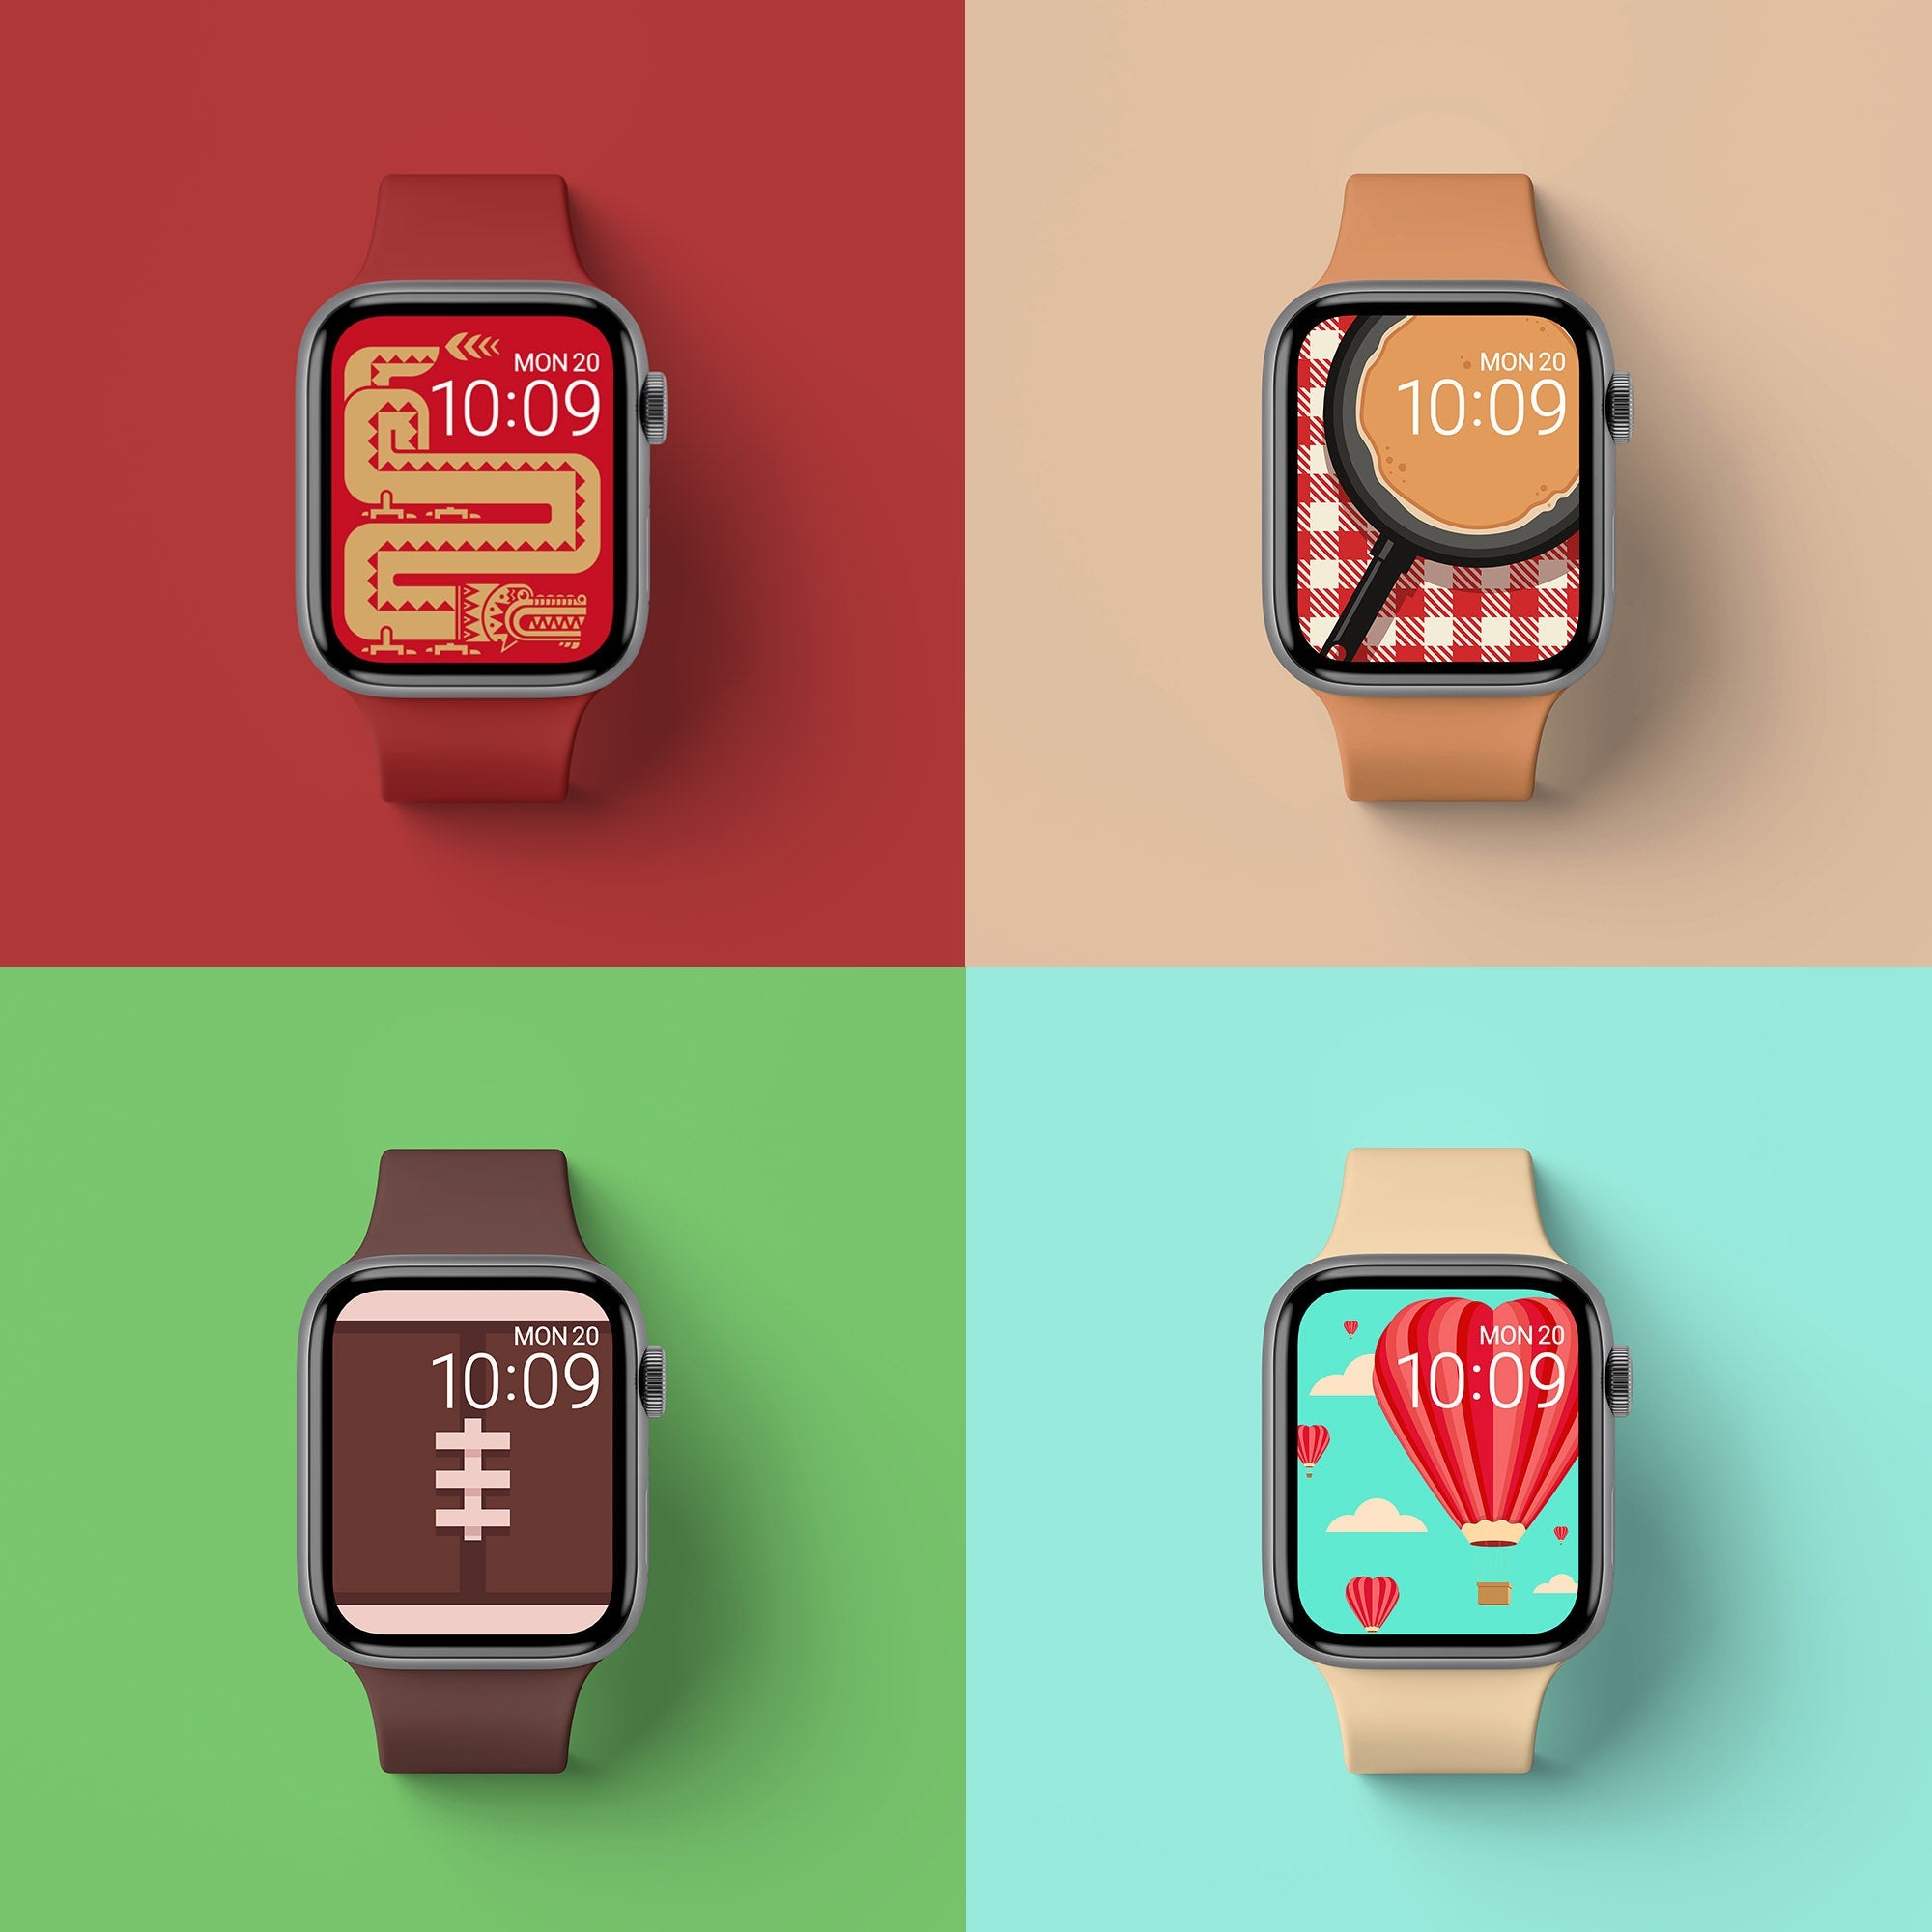 Wallpapers of the Month| Feb | Apple Watch Wallpapers - 4 Pack - Buckle and Band - FEBWP